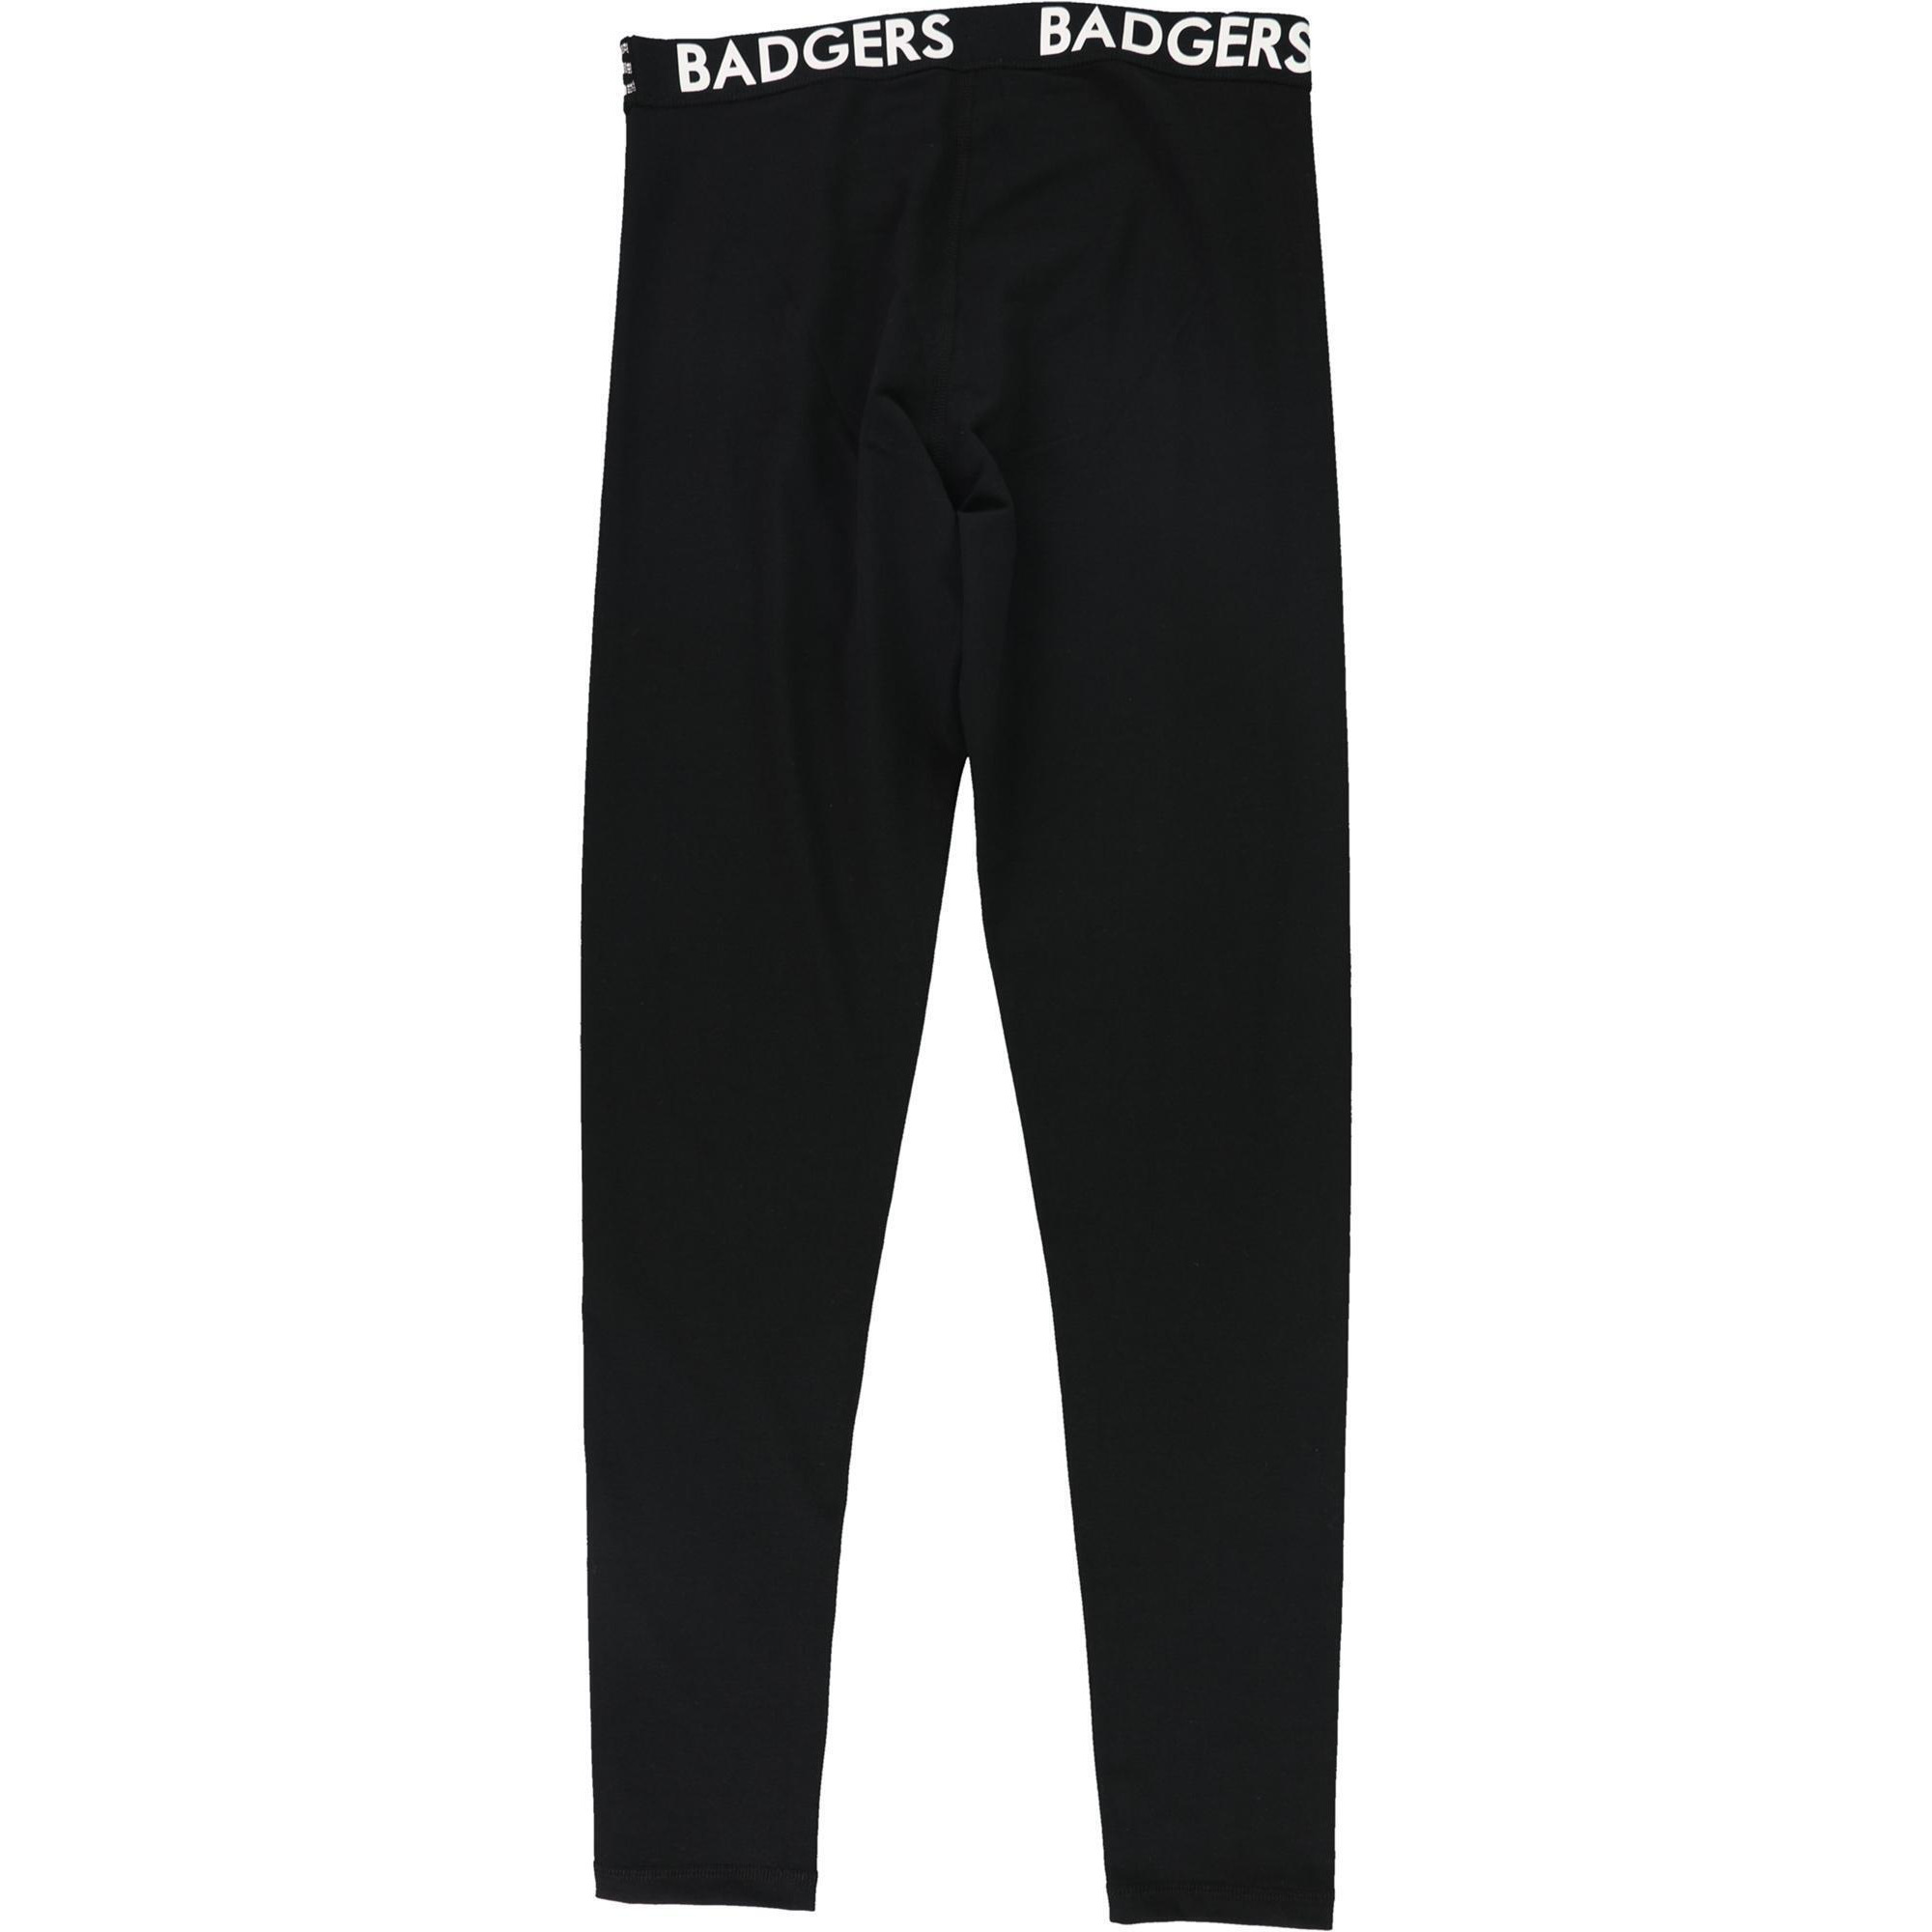 Touch Womens Wisconsin Badgers Compression Athletic Pants, Style # 6T92Z438 alternate image